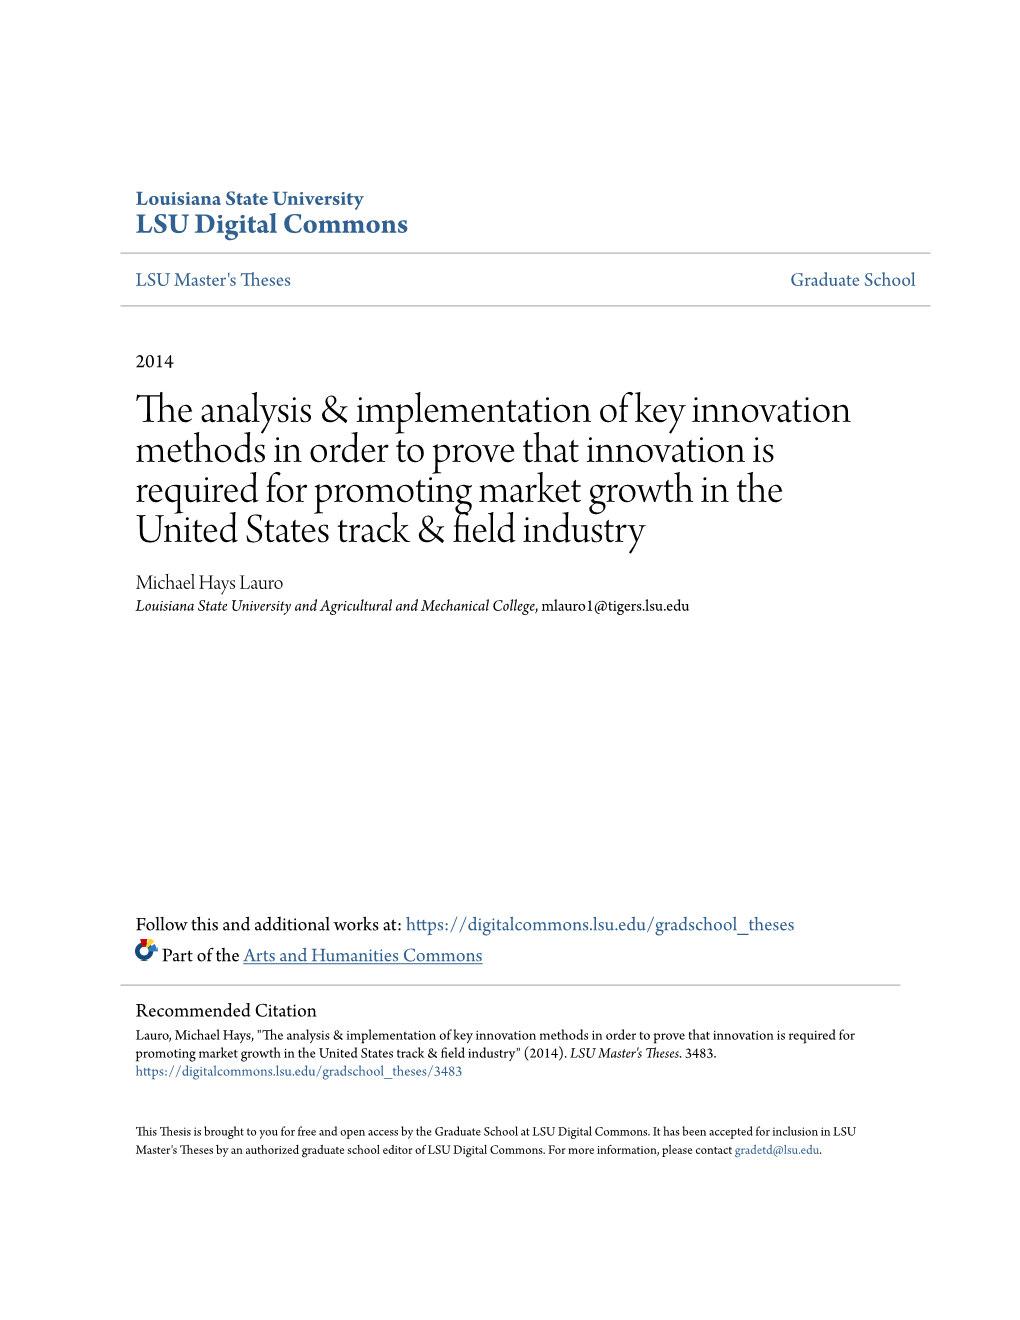 The Analysis & Implementation of Key Innovation Methods in Order to Prove That Innovation Is Required for Promoting Market G